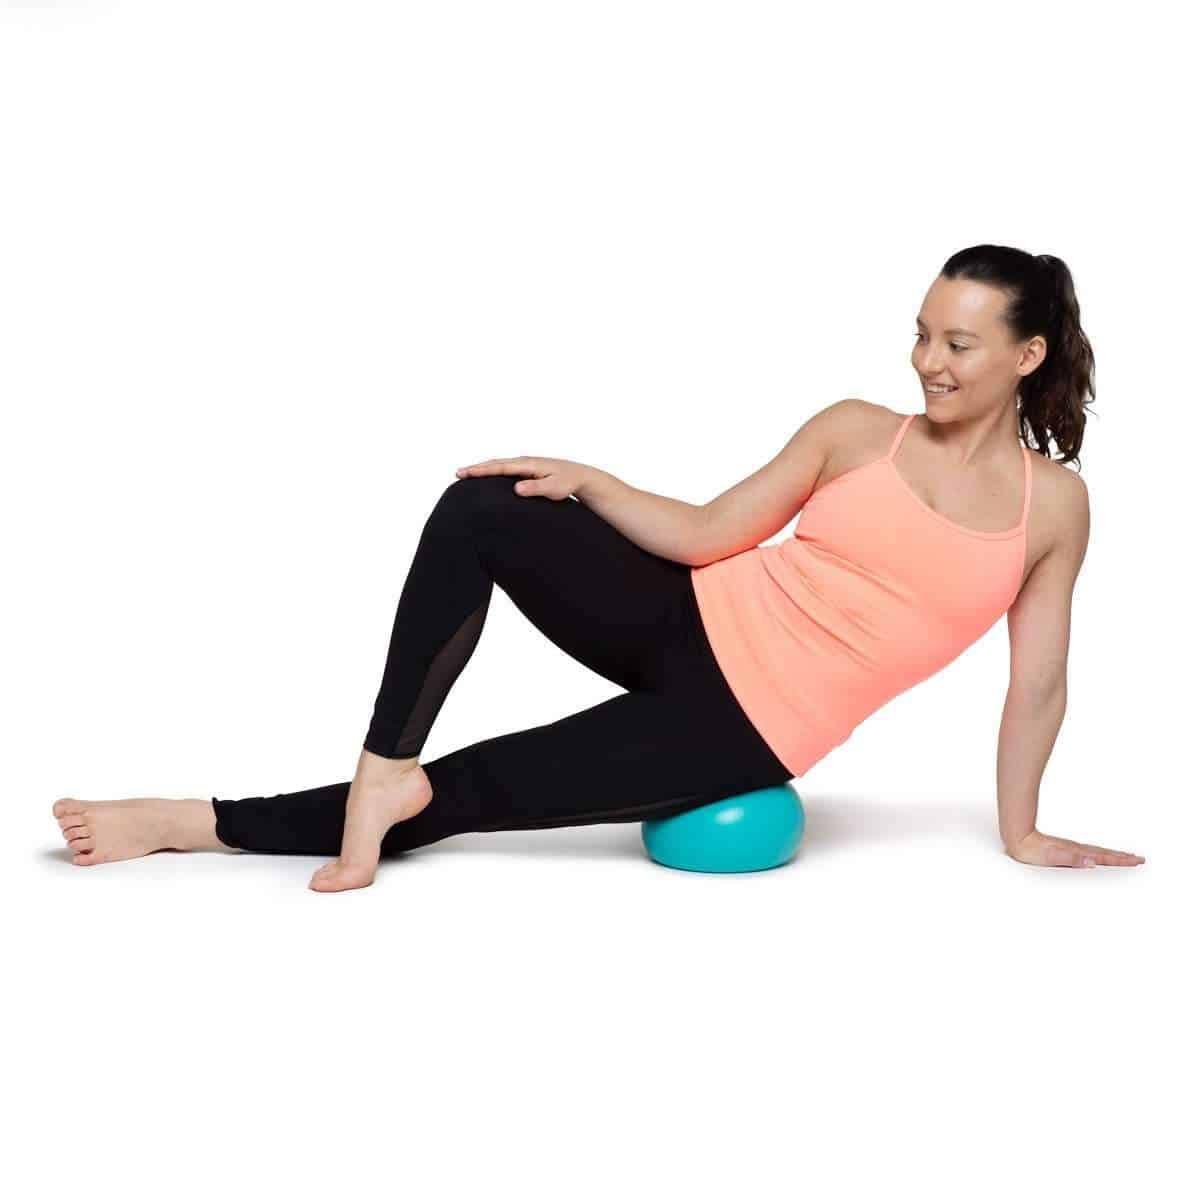 LoRox Body Sphere - Ideal For Balance and Core Workouts - Senior.com Exercise Balls